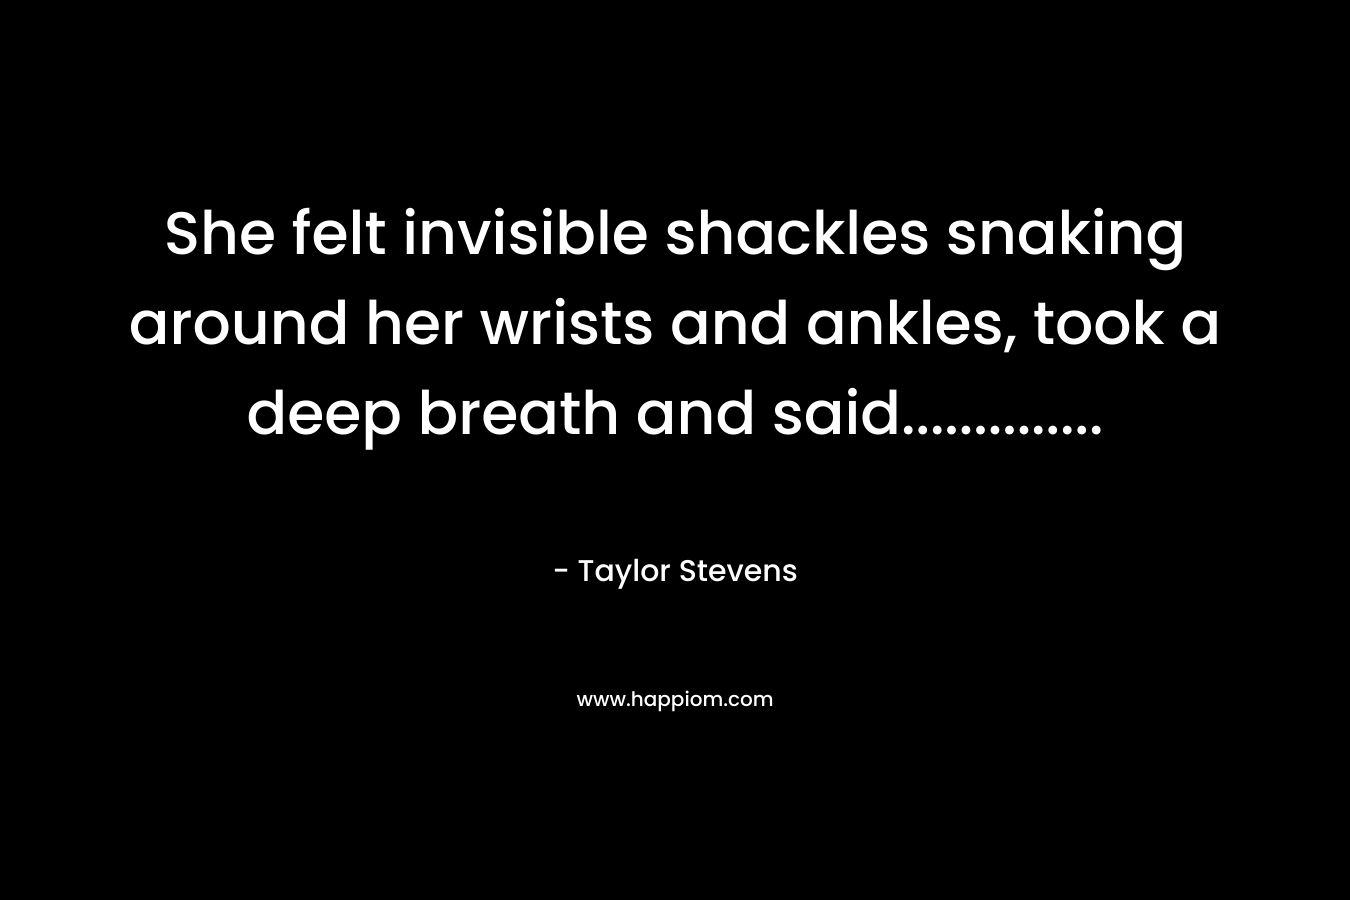 She felt invisible shackles snaking around her wrists and ankles, took a deep breath and said………….. – Taylor Stevens